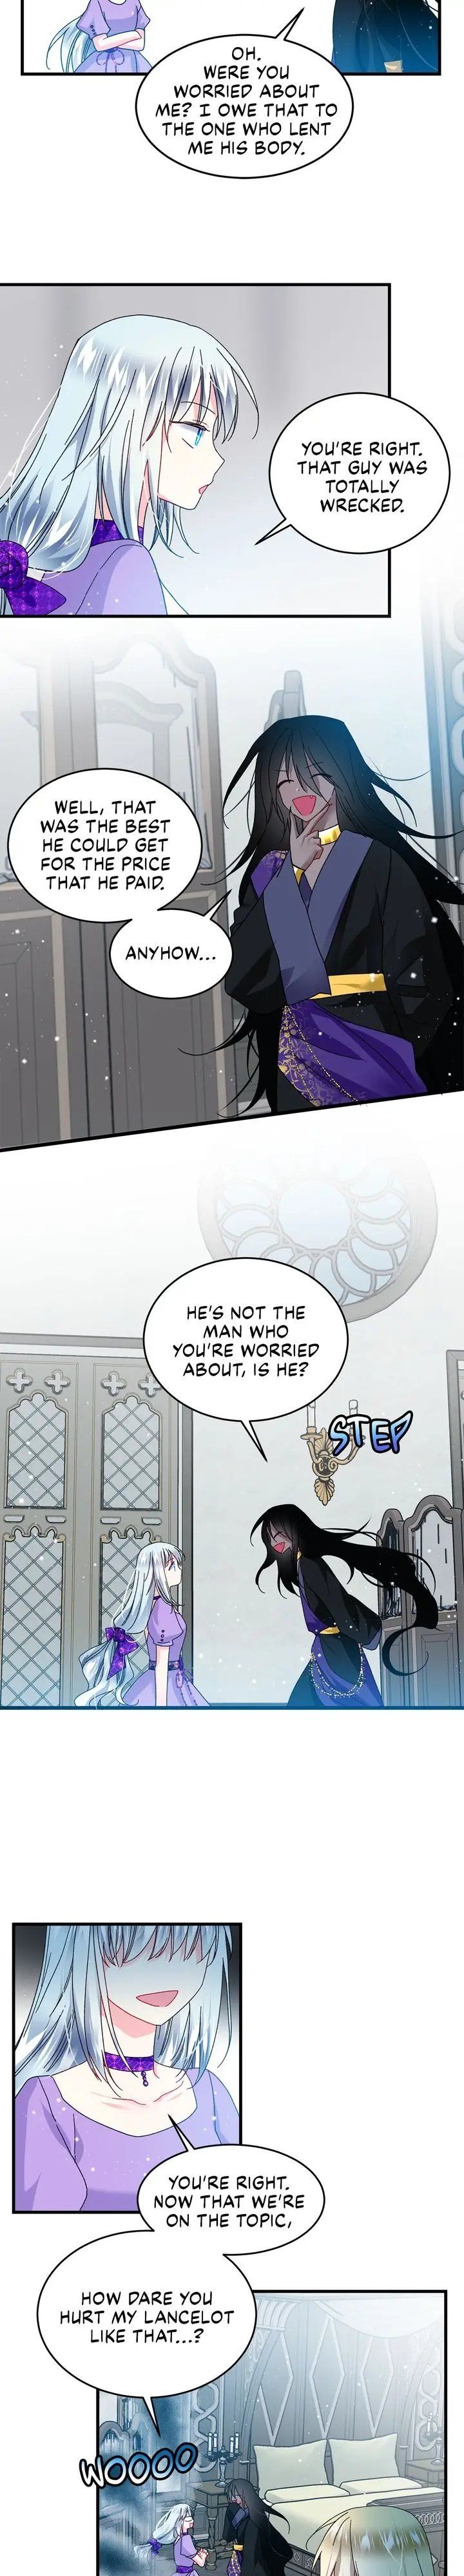 The Lady's Butler Chapter 37 page 17